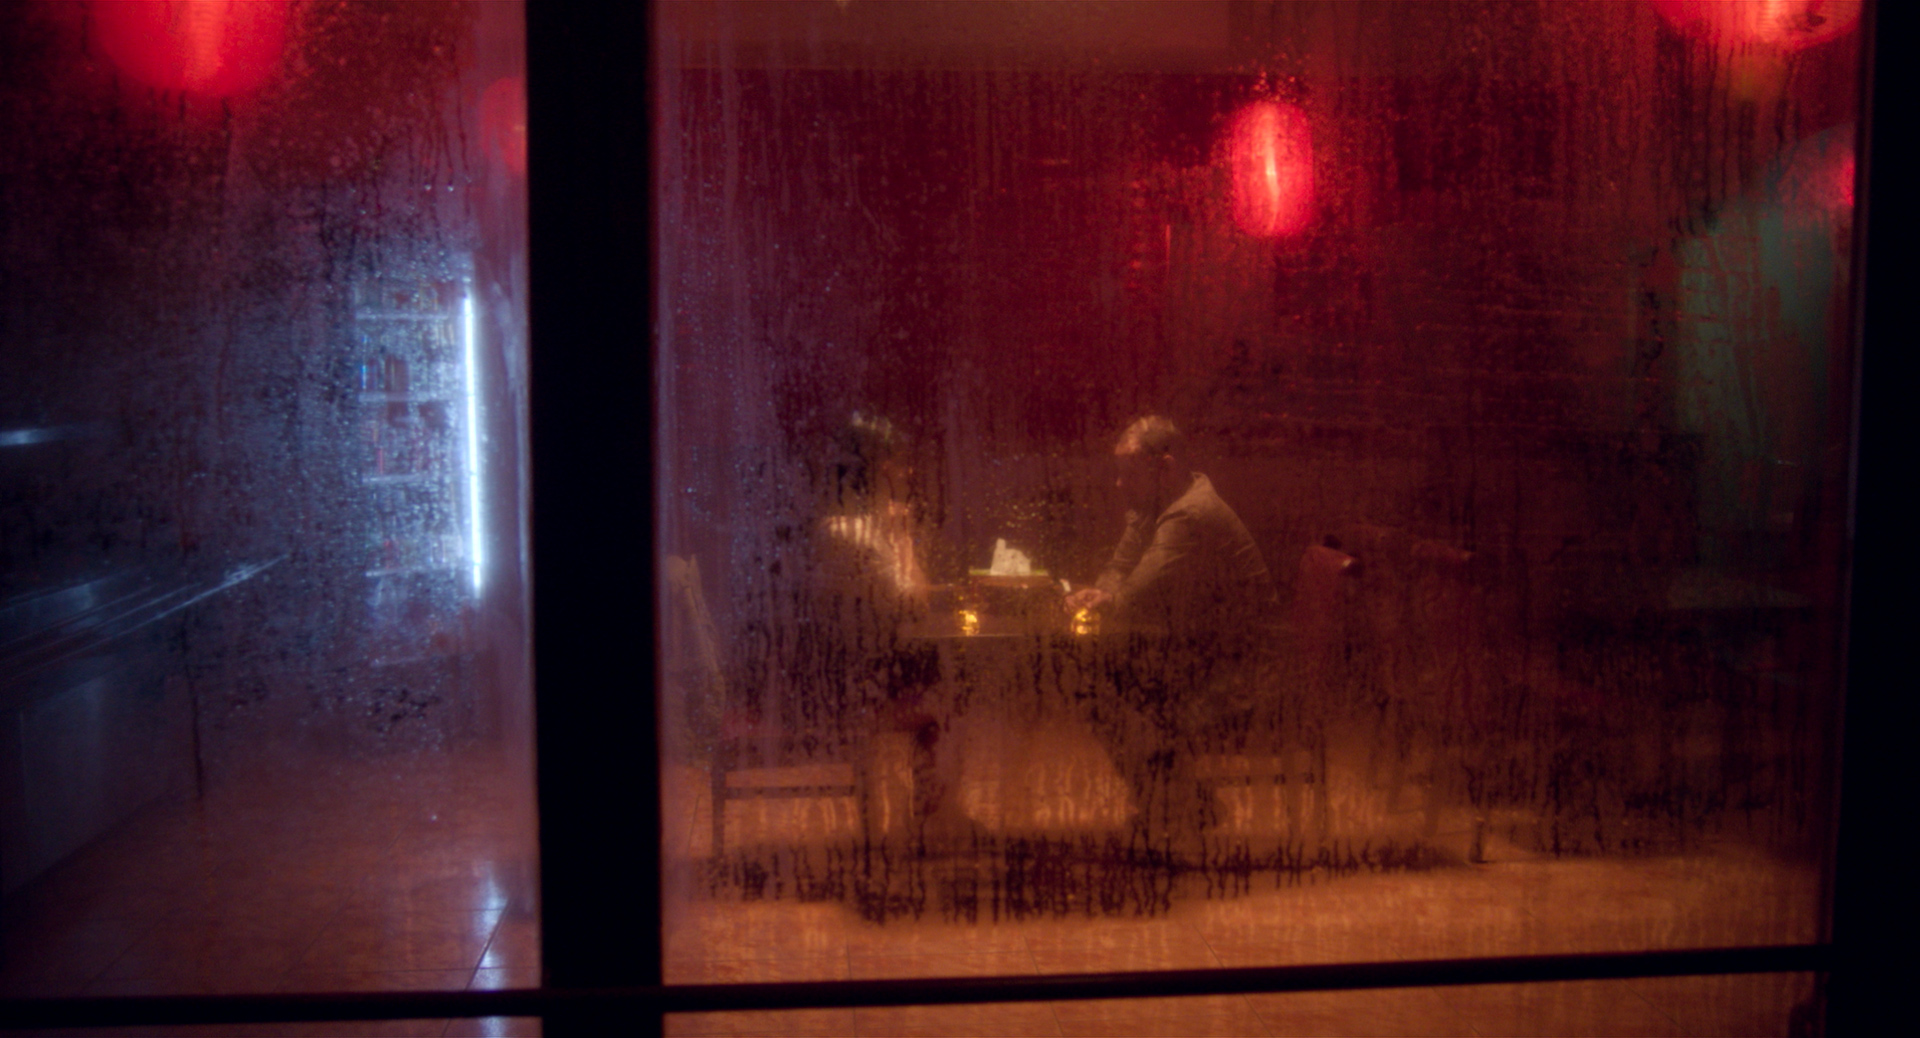 eszter galambos, Still from the short Tiger. Director of Photography, DOP, Cinematographer, operatőr: Eszter Galambos. Director: Péter Hajmási. Colorist: Anna Stalter, Cast: Milán SchruffChinese restaurant at night. Atmospheric look. Moody environment. Man and women sitting there. Still from a short film called Tiger. Director of Phototgraphy: Eszter Galambos